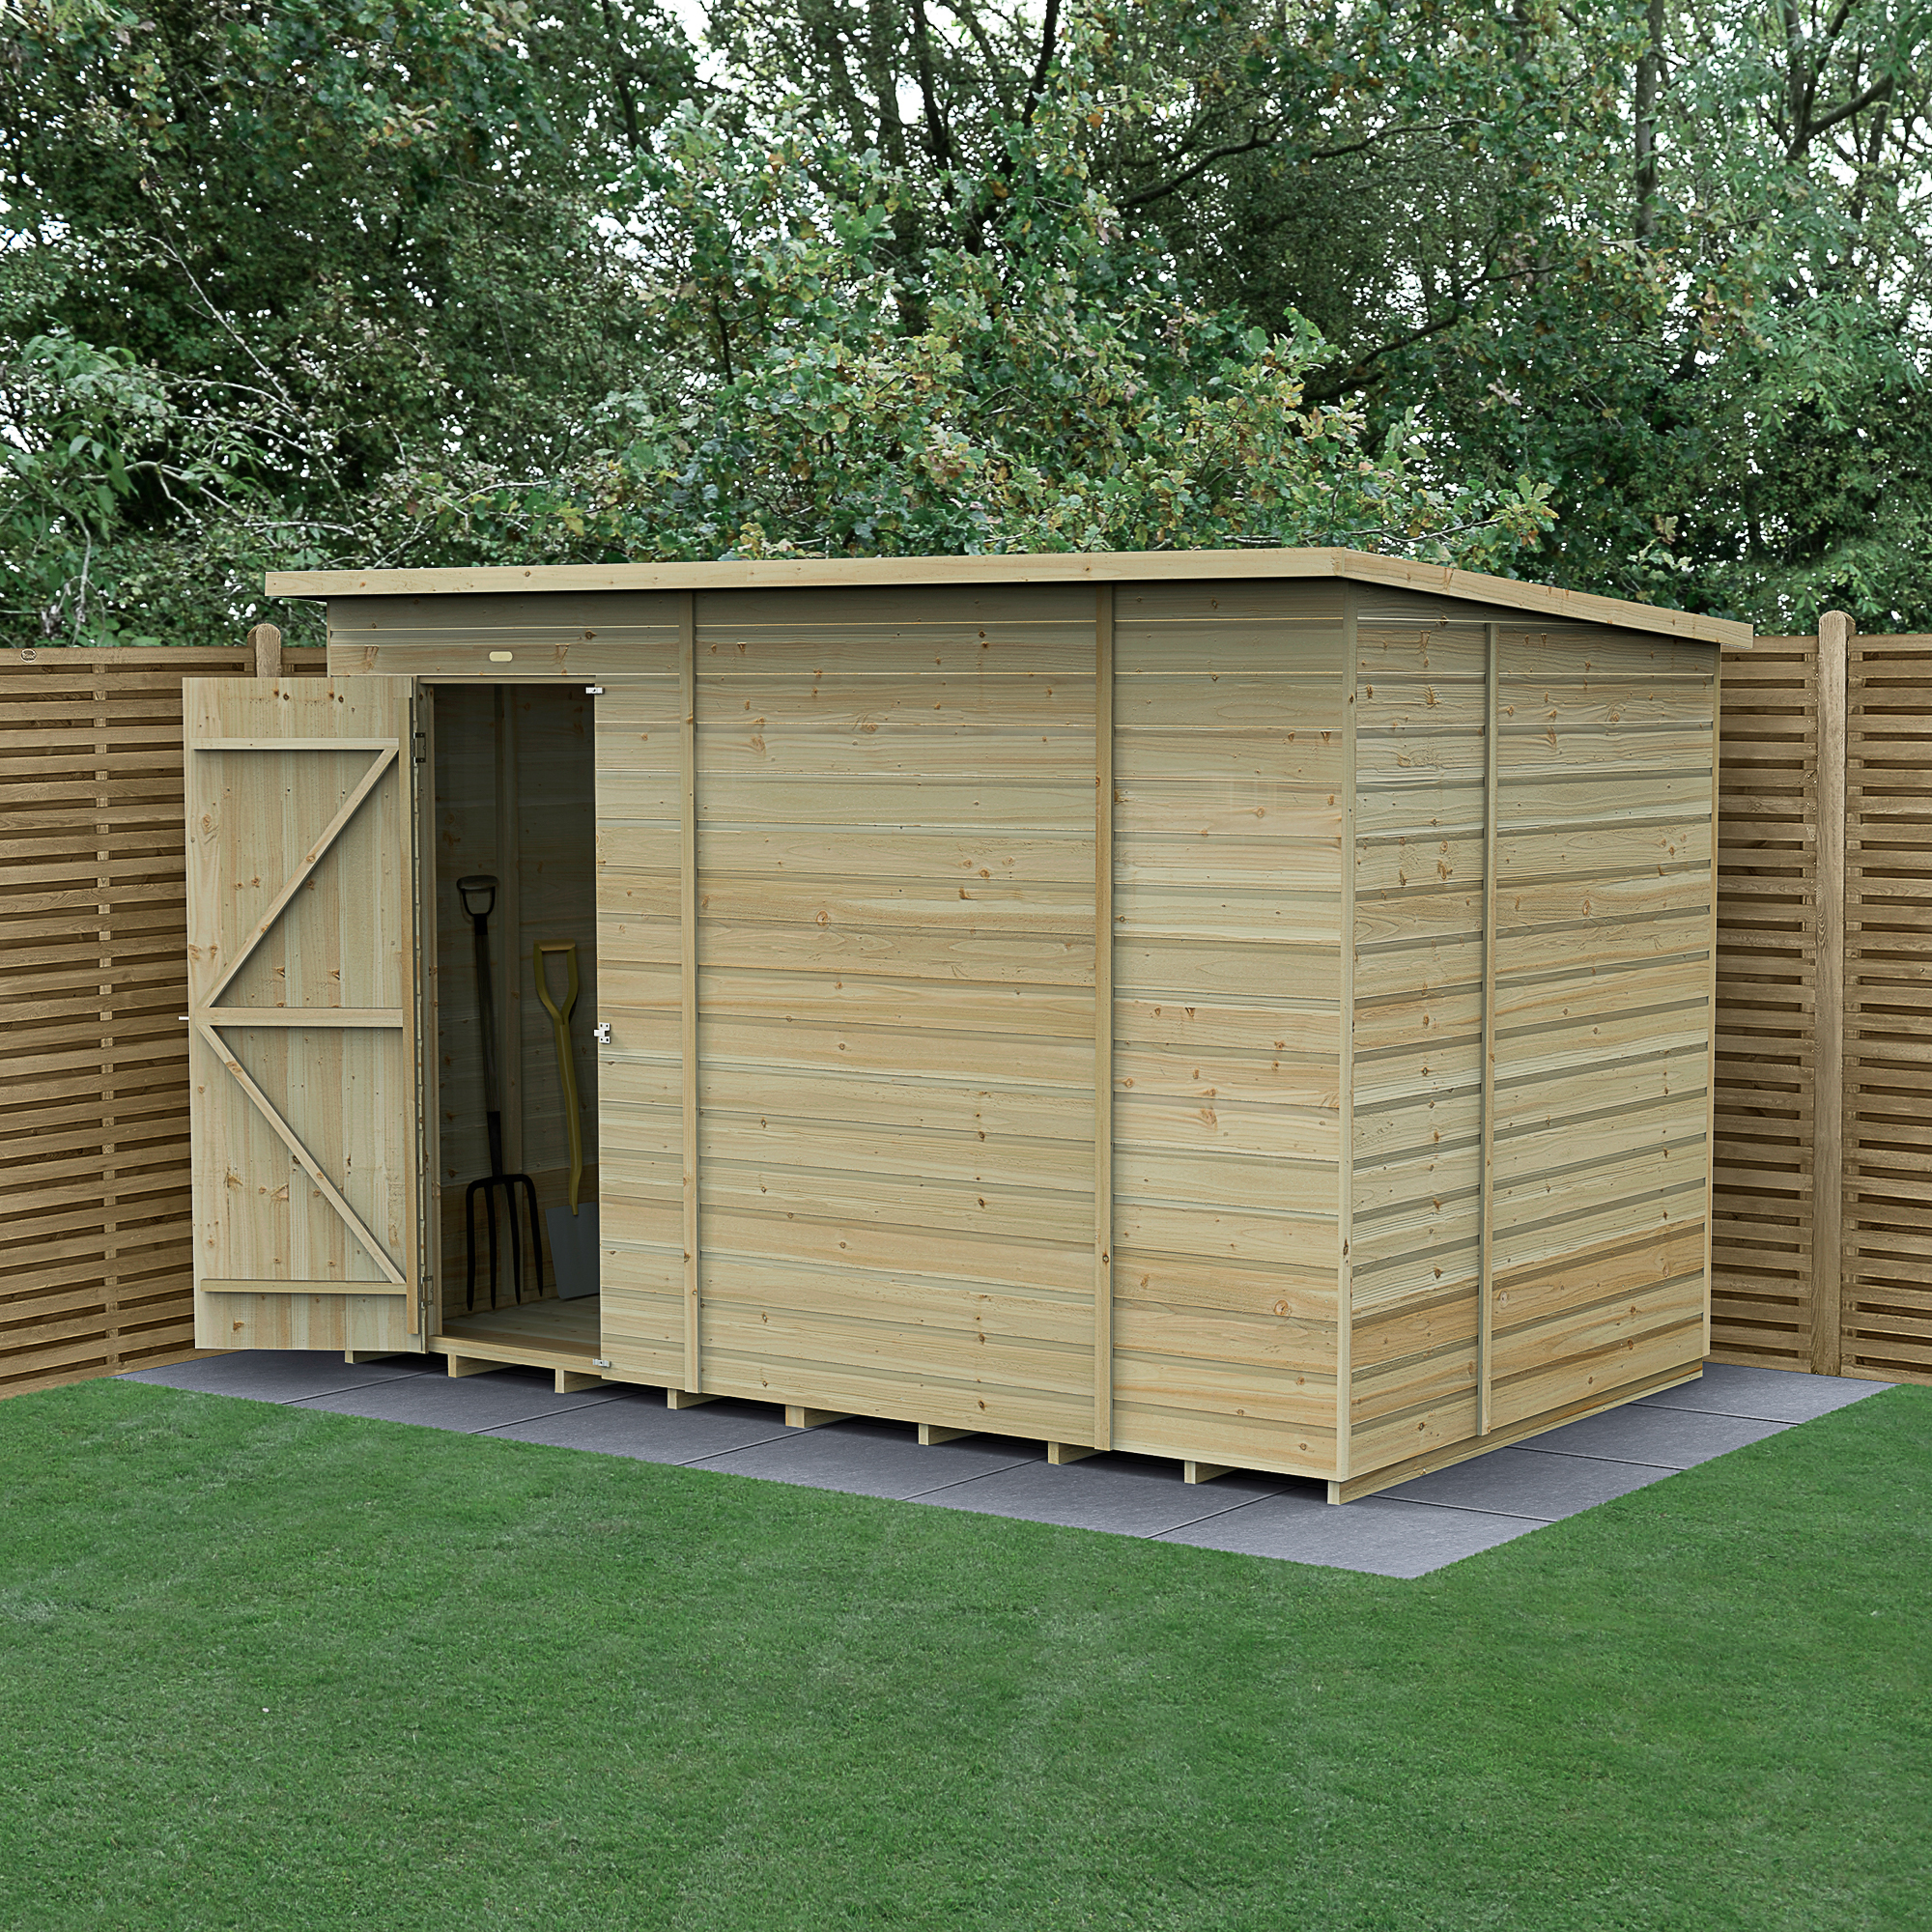 Forest Garden Beckwood 10 x 6ft Pent Shiplap Pressure Treated Windowless Shed with Base